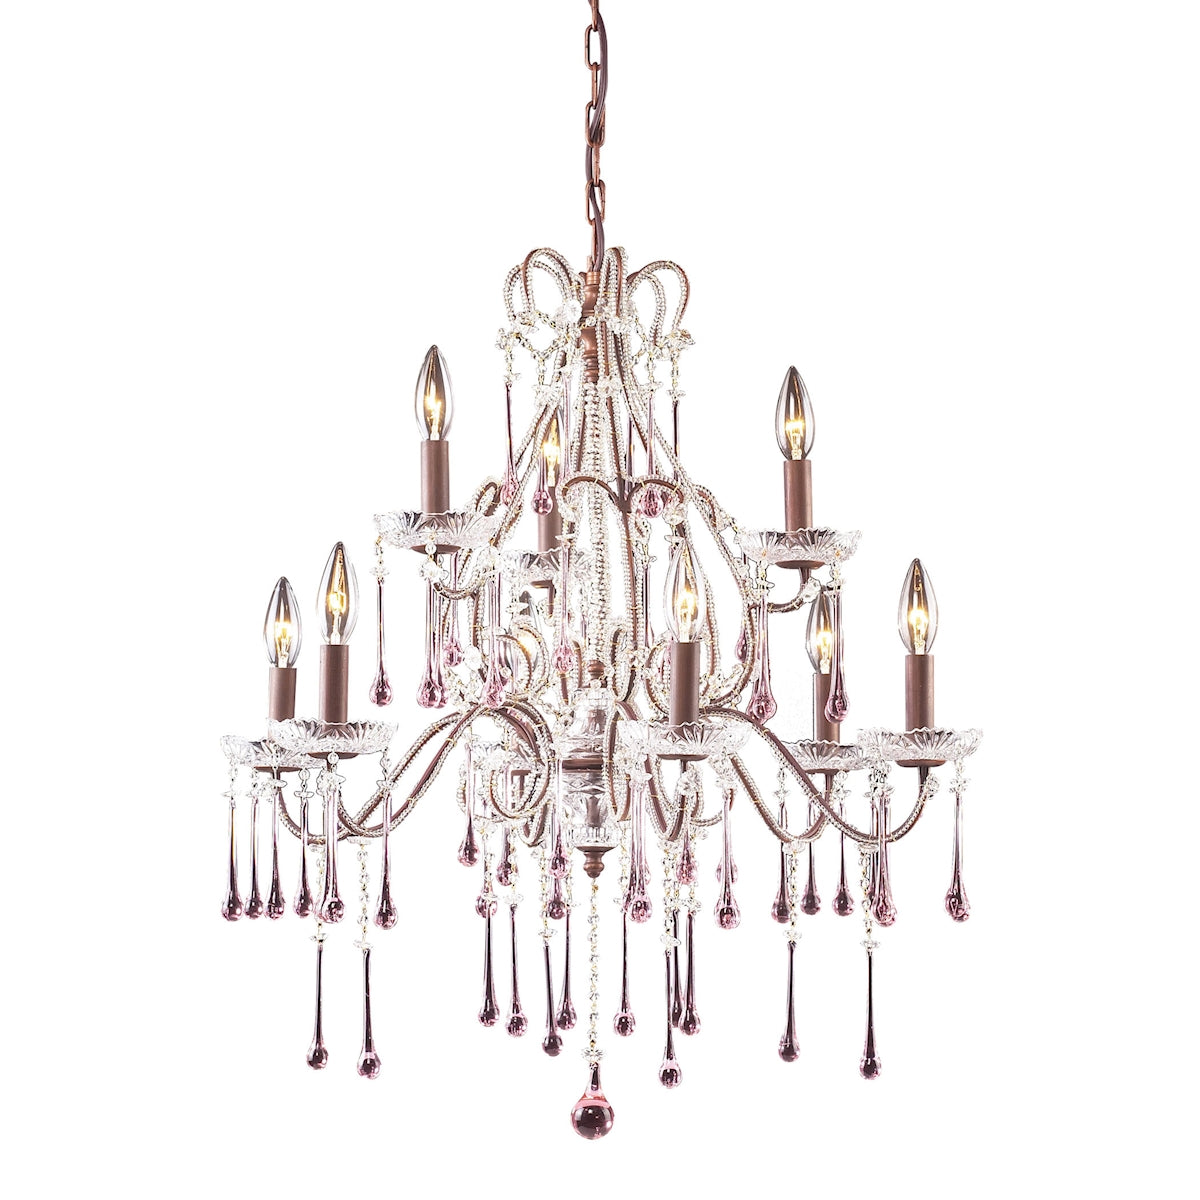 ELK Lighting 4013/6+3RS Opulence 9-Light Chandelier in Rust with Rose Crystals